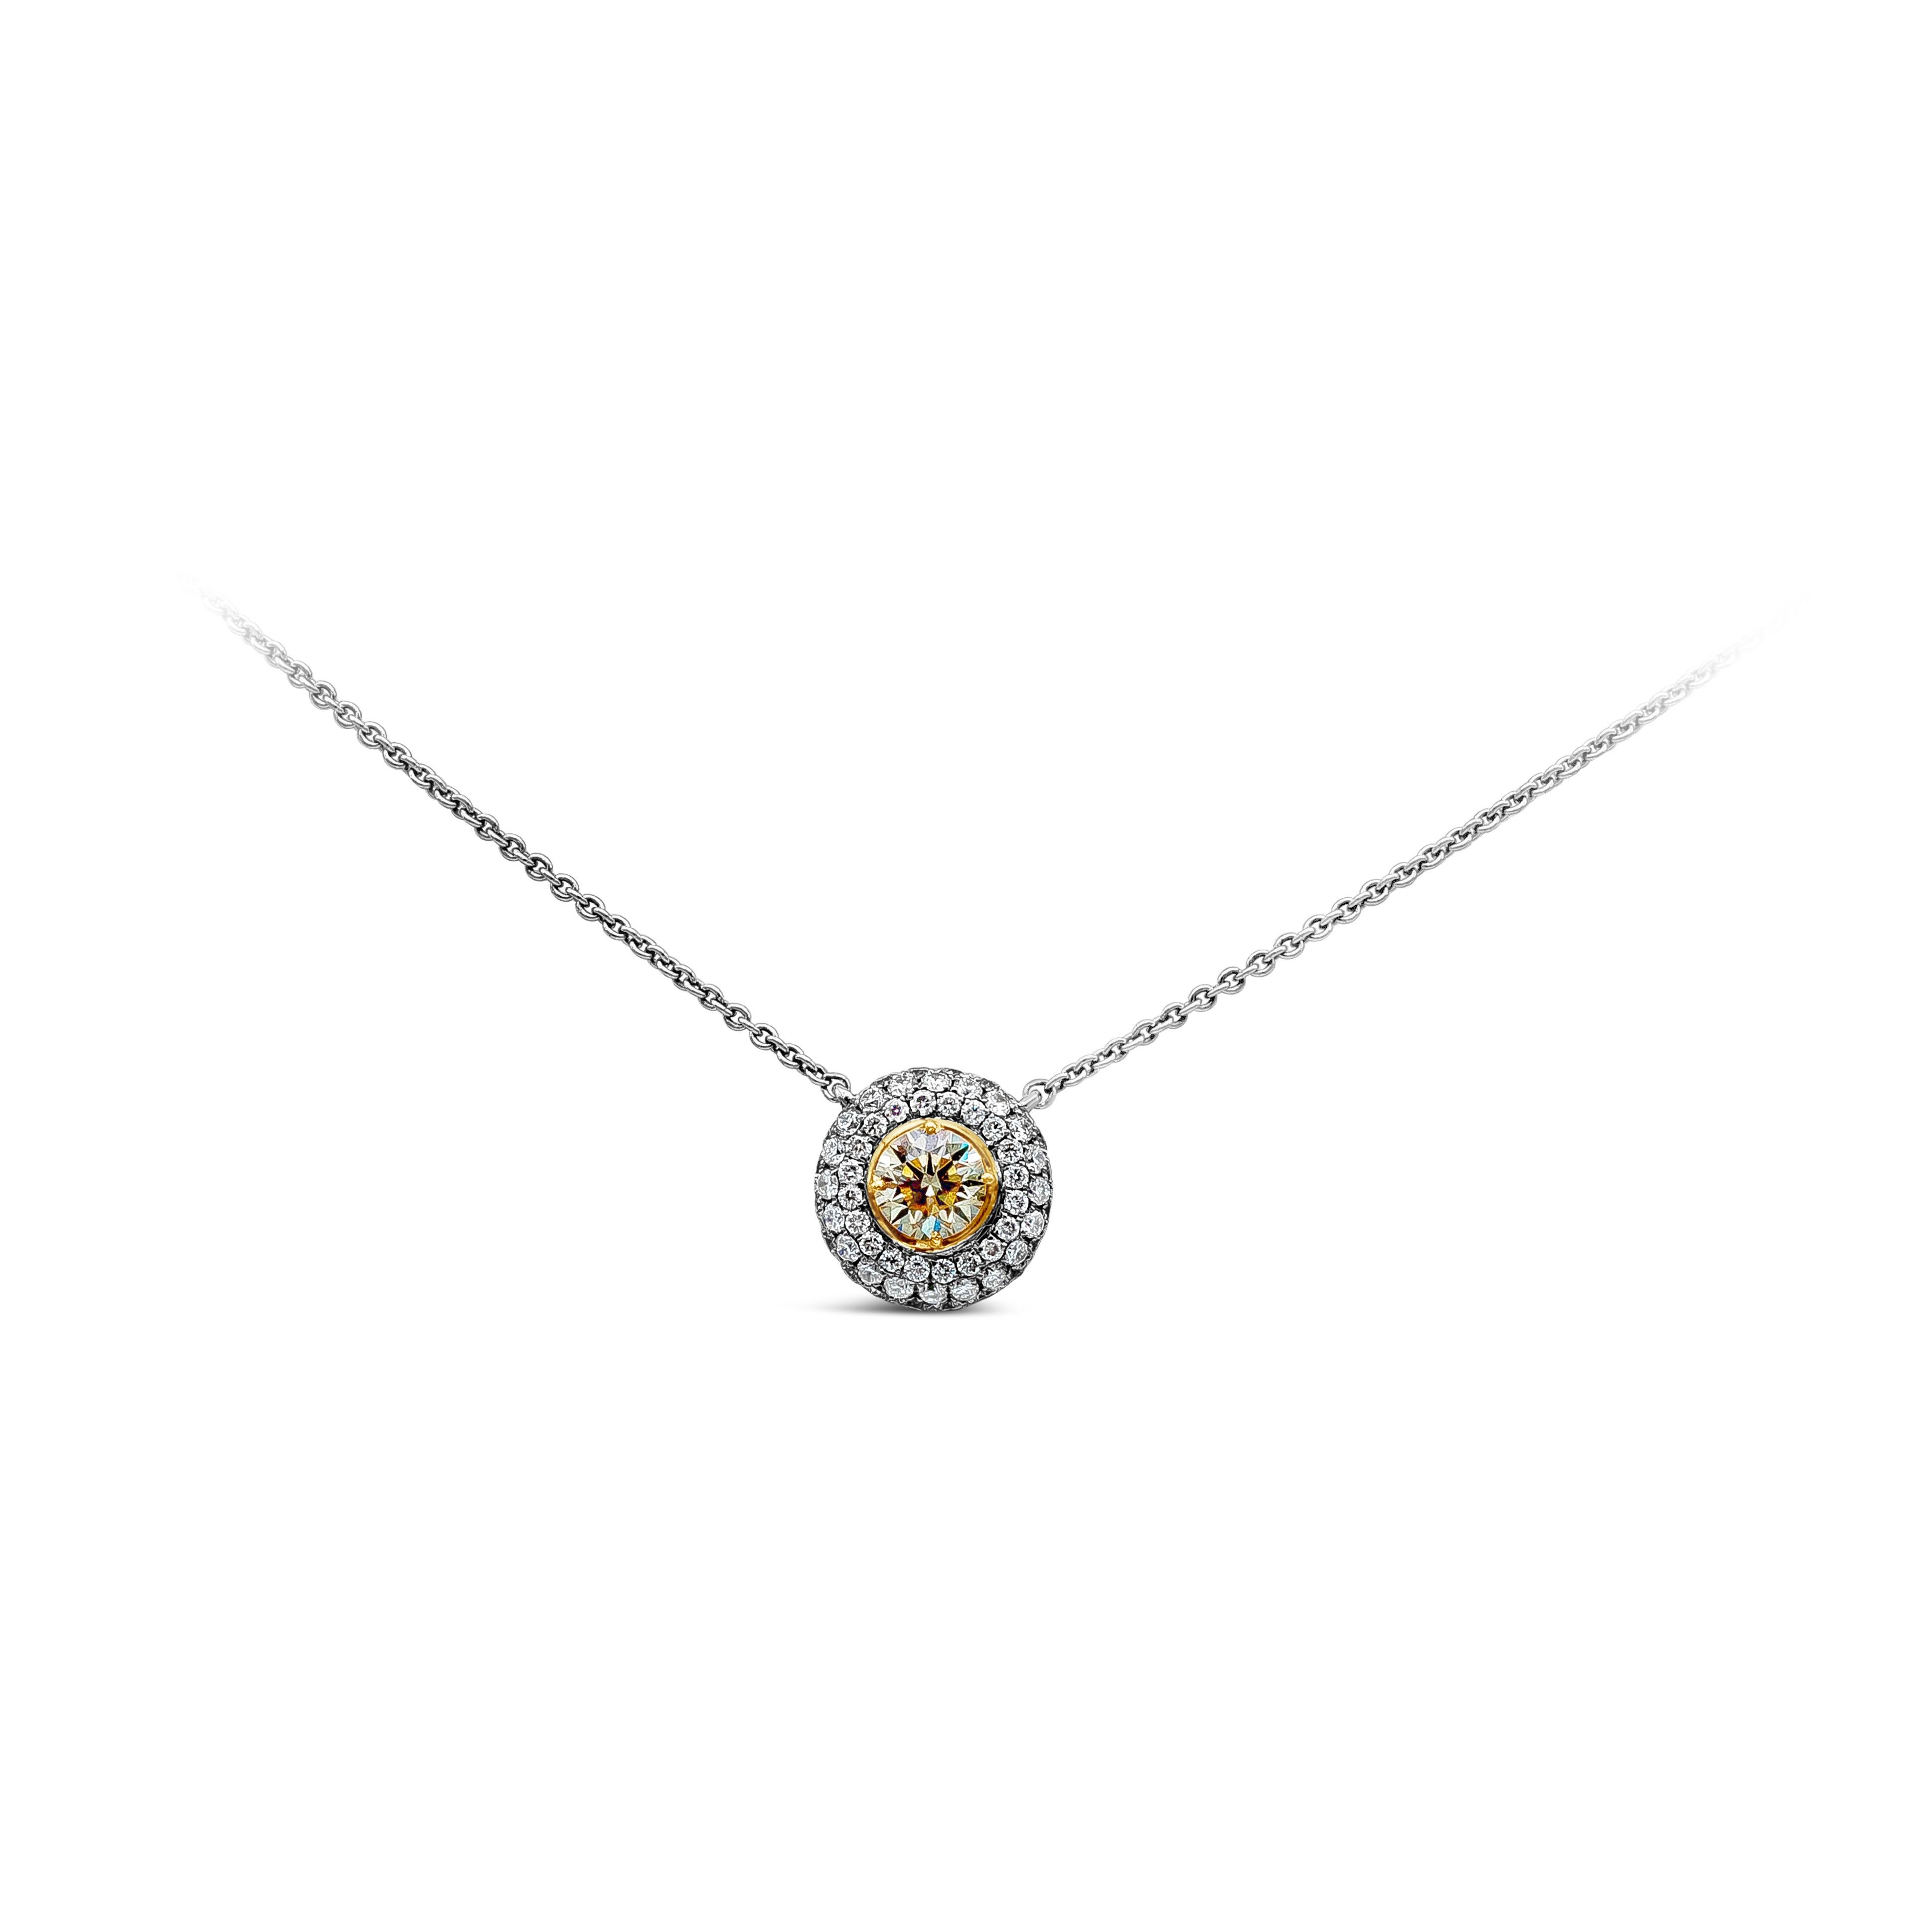 Showcasing a 0.42 carats round natural yellow diamond, surrounded by row of brilliant round cut diamonds weighing 0.71 carats total. Accent diamonds are set in a micro-pave set and Finely made in 18K white gold. Suspended on an 18 inch adjustable